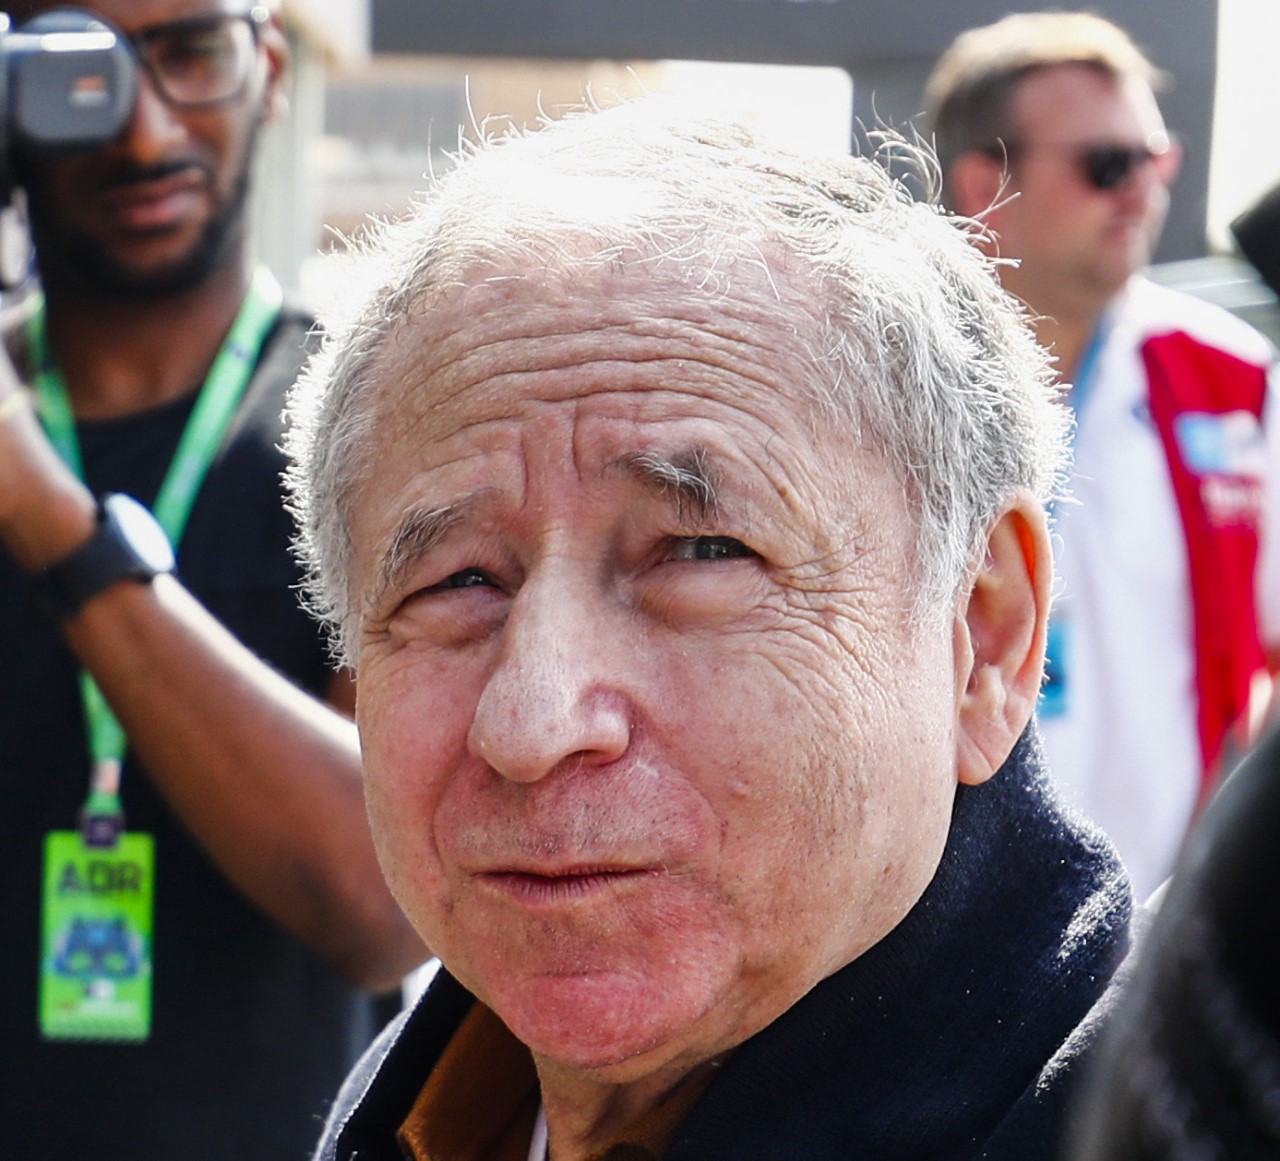 Did Jean Todt pull a fast one?